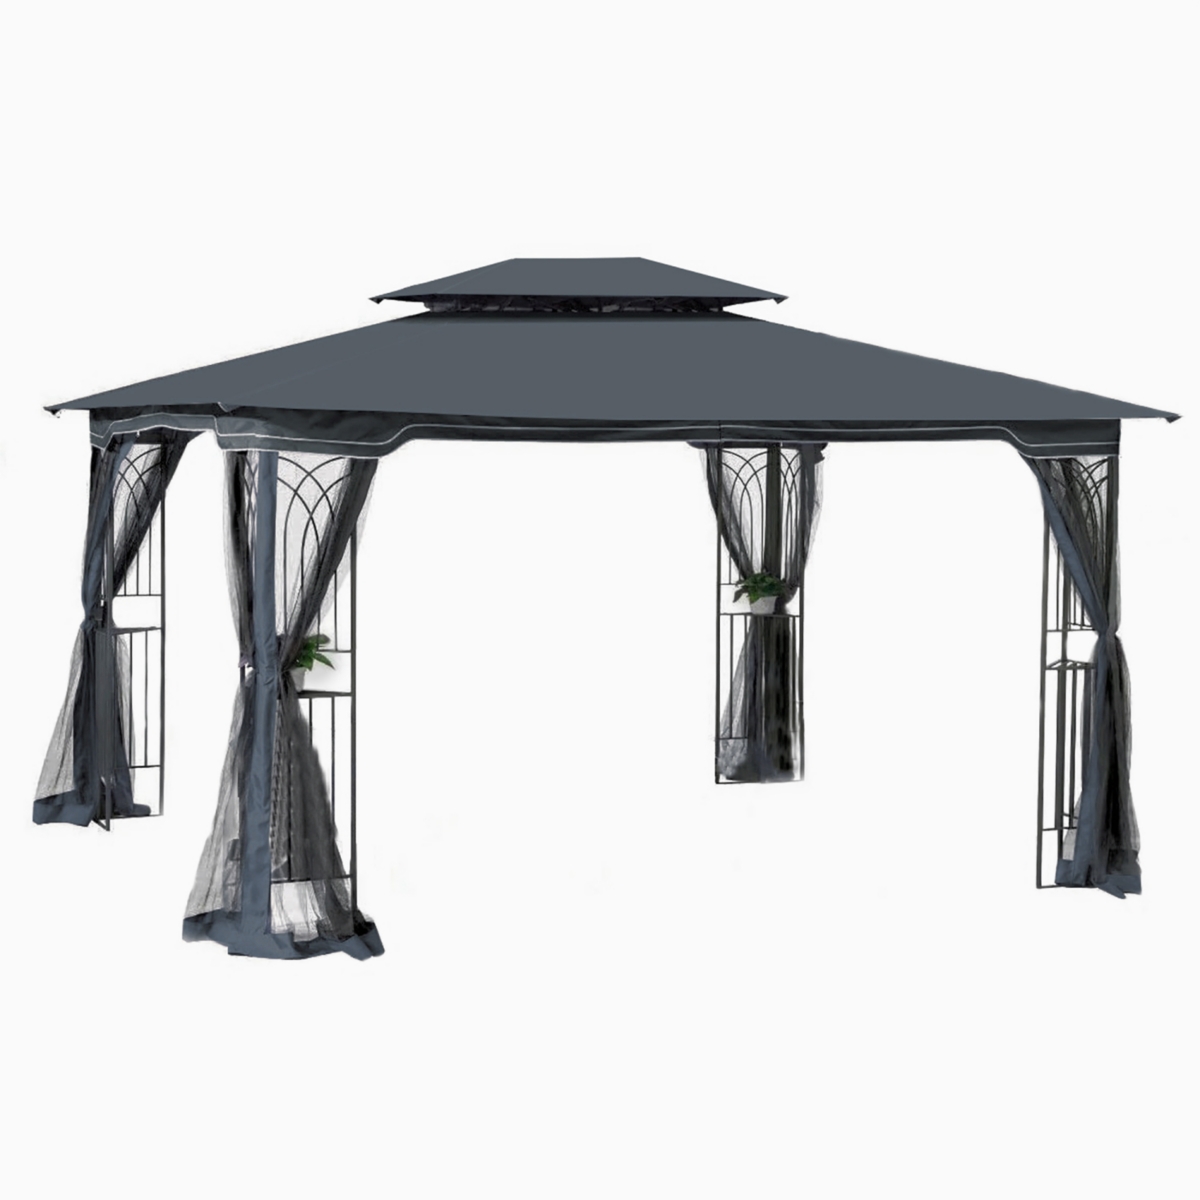 13 X 10 Outdoor Patio Gazebo Canopy Tent With Ventilated Double Roof And Mosquito Net - Grey